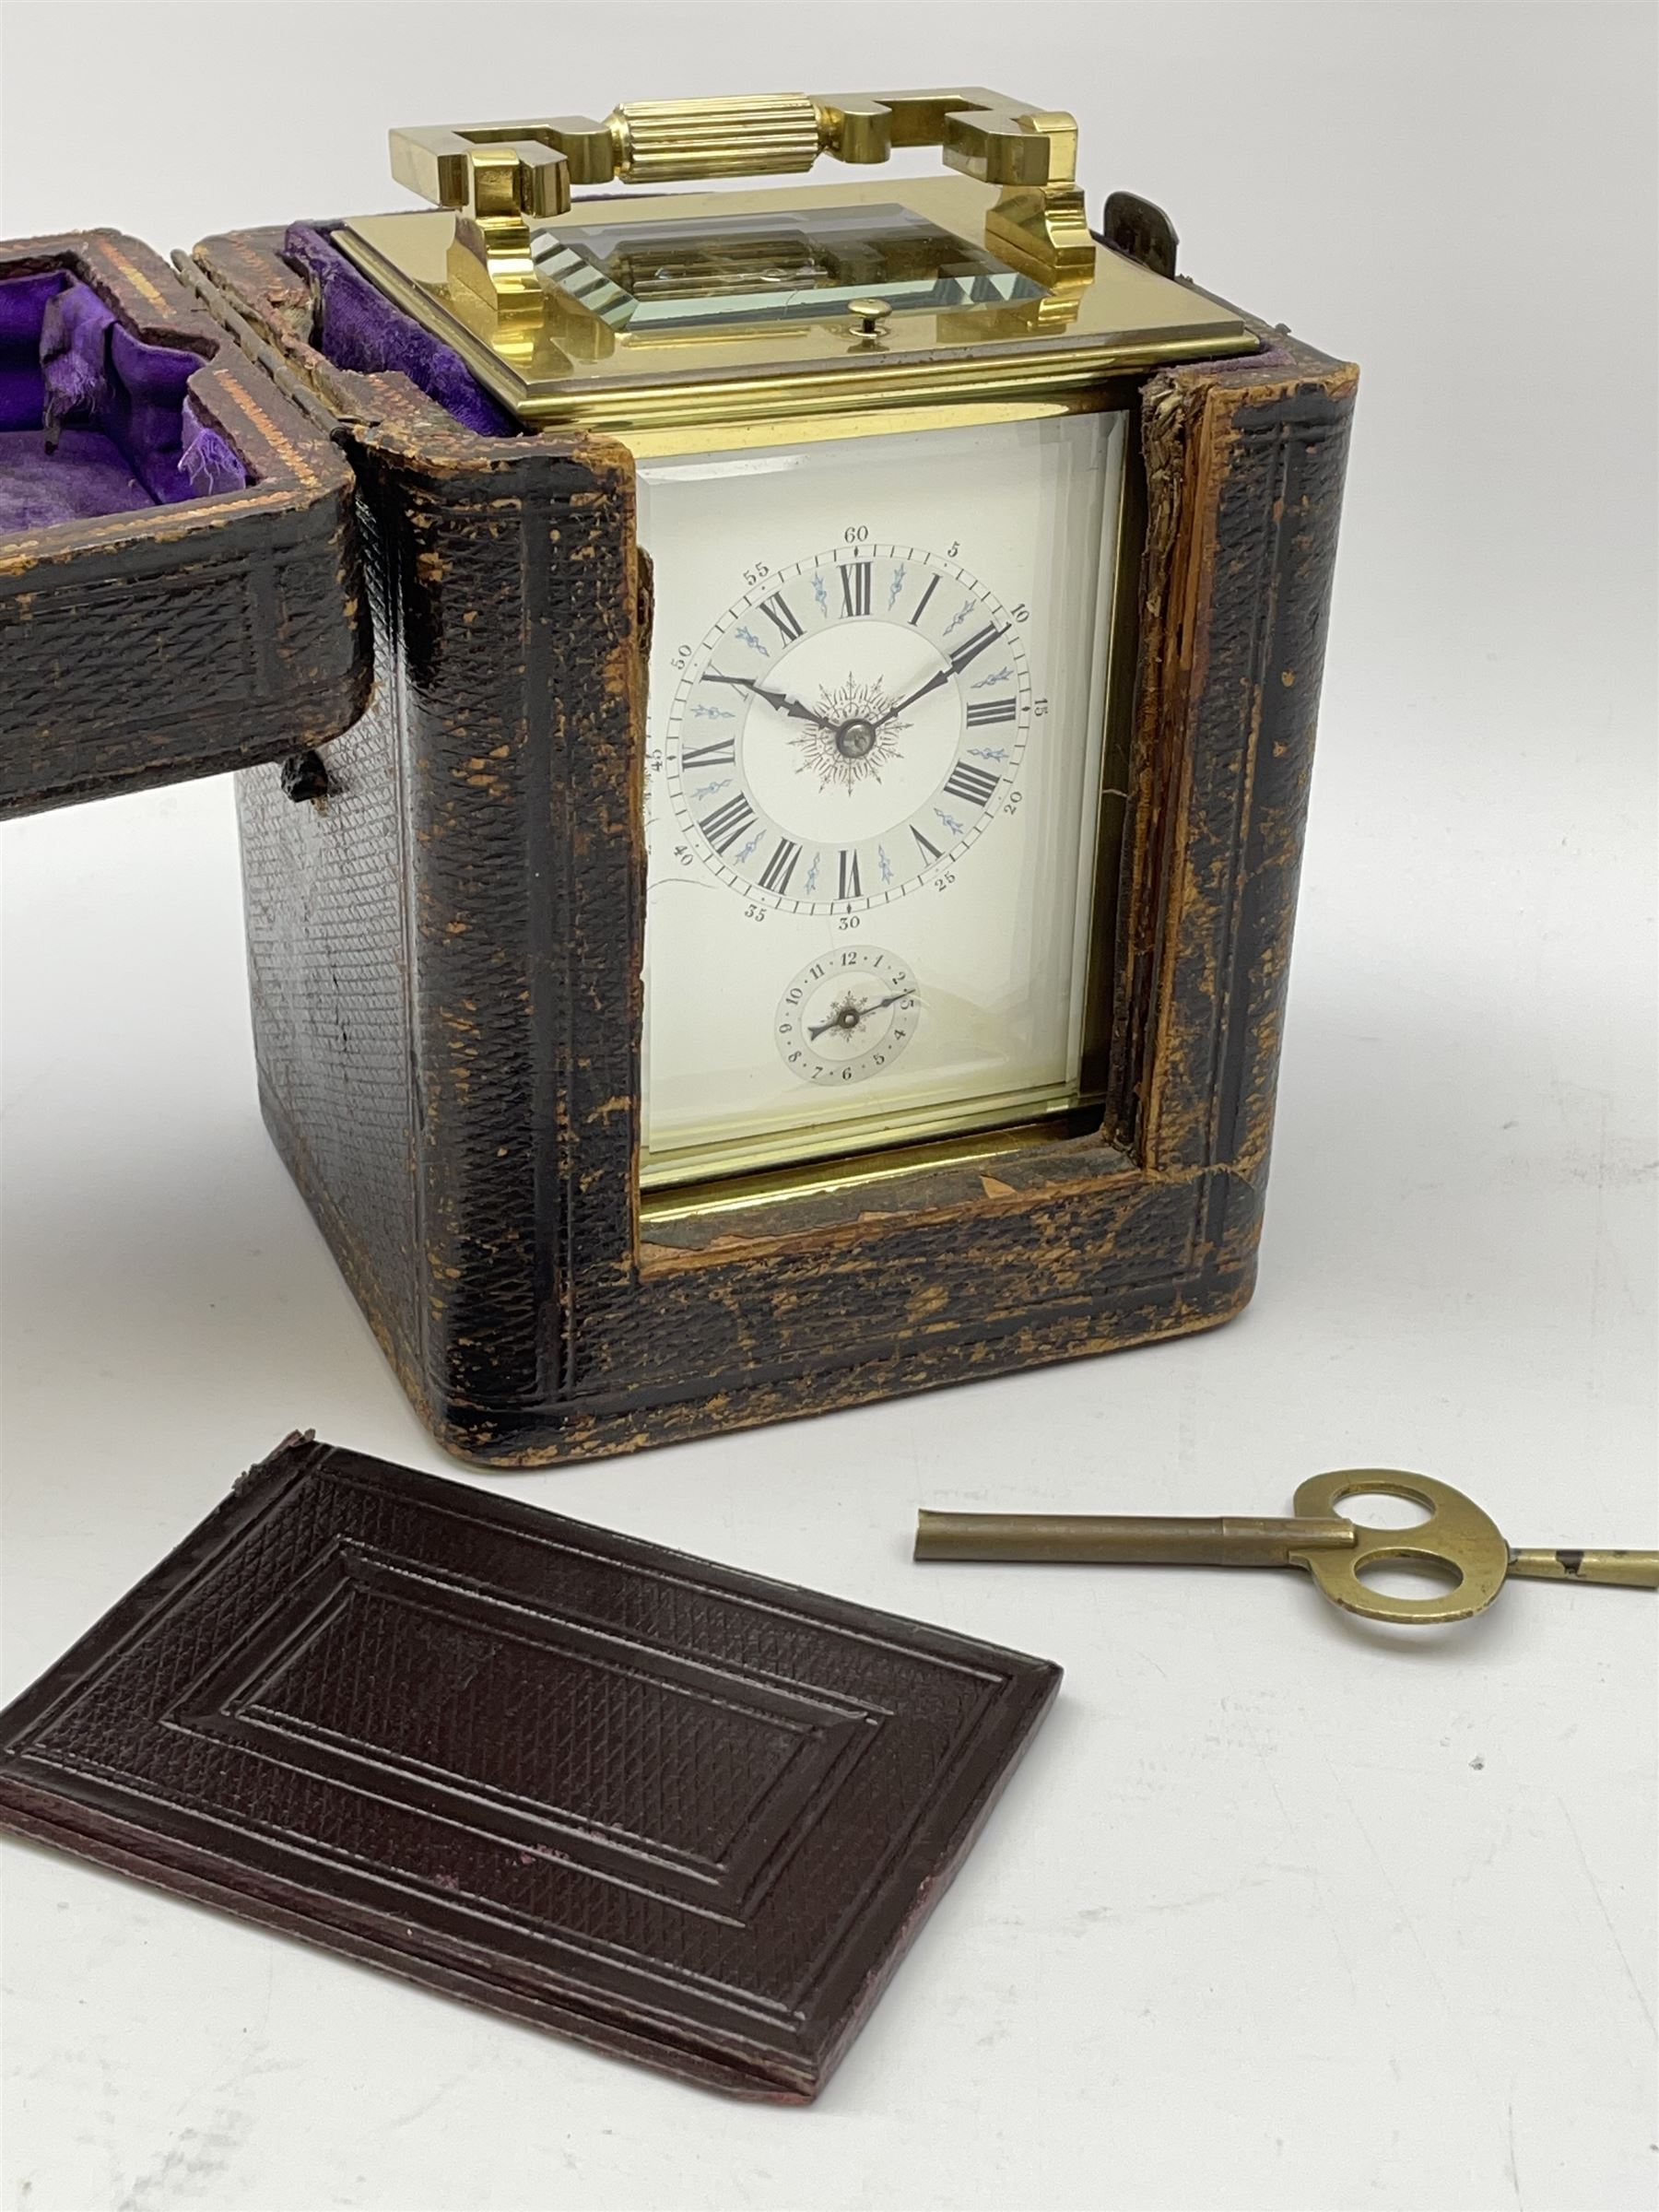 Early 20th century brass and bevelled glass repeater carriage clock with alarm - Image 9 of 9